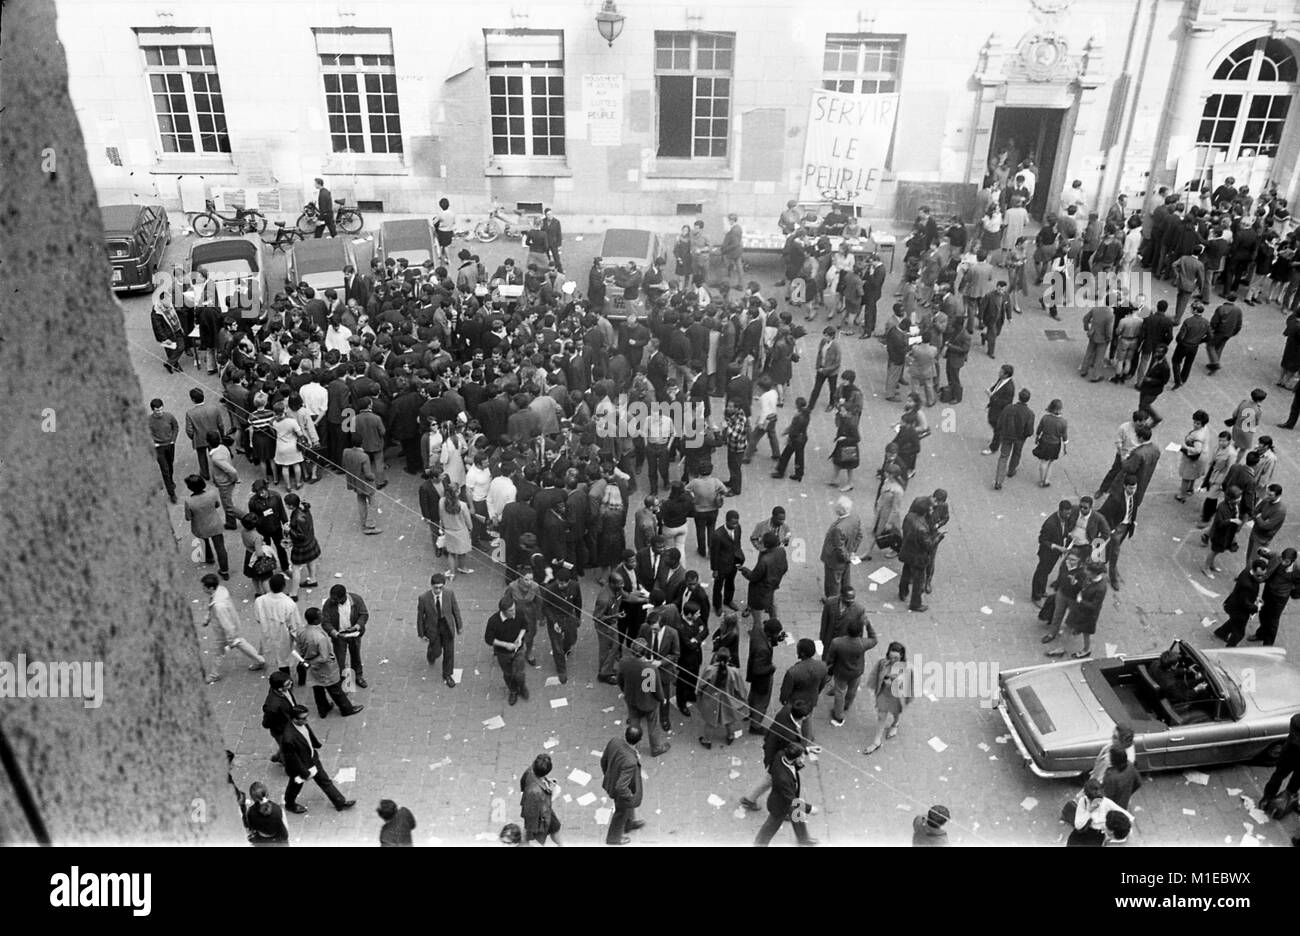 Philippe Gras / Le Pictorium -  May 68 -  1968  -  France / Ile-de-France (region) / Paris  -  Rally in the courtyard of the Sorbonne, 1968 Stock Photo